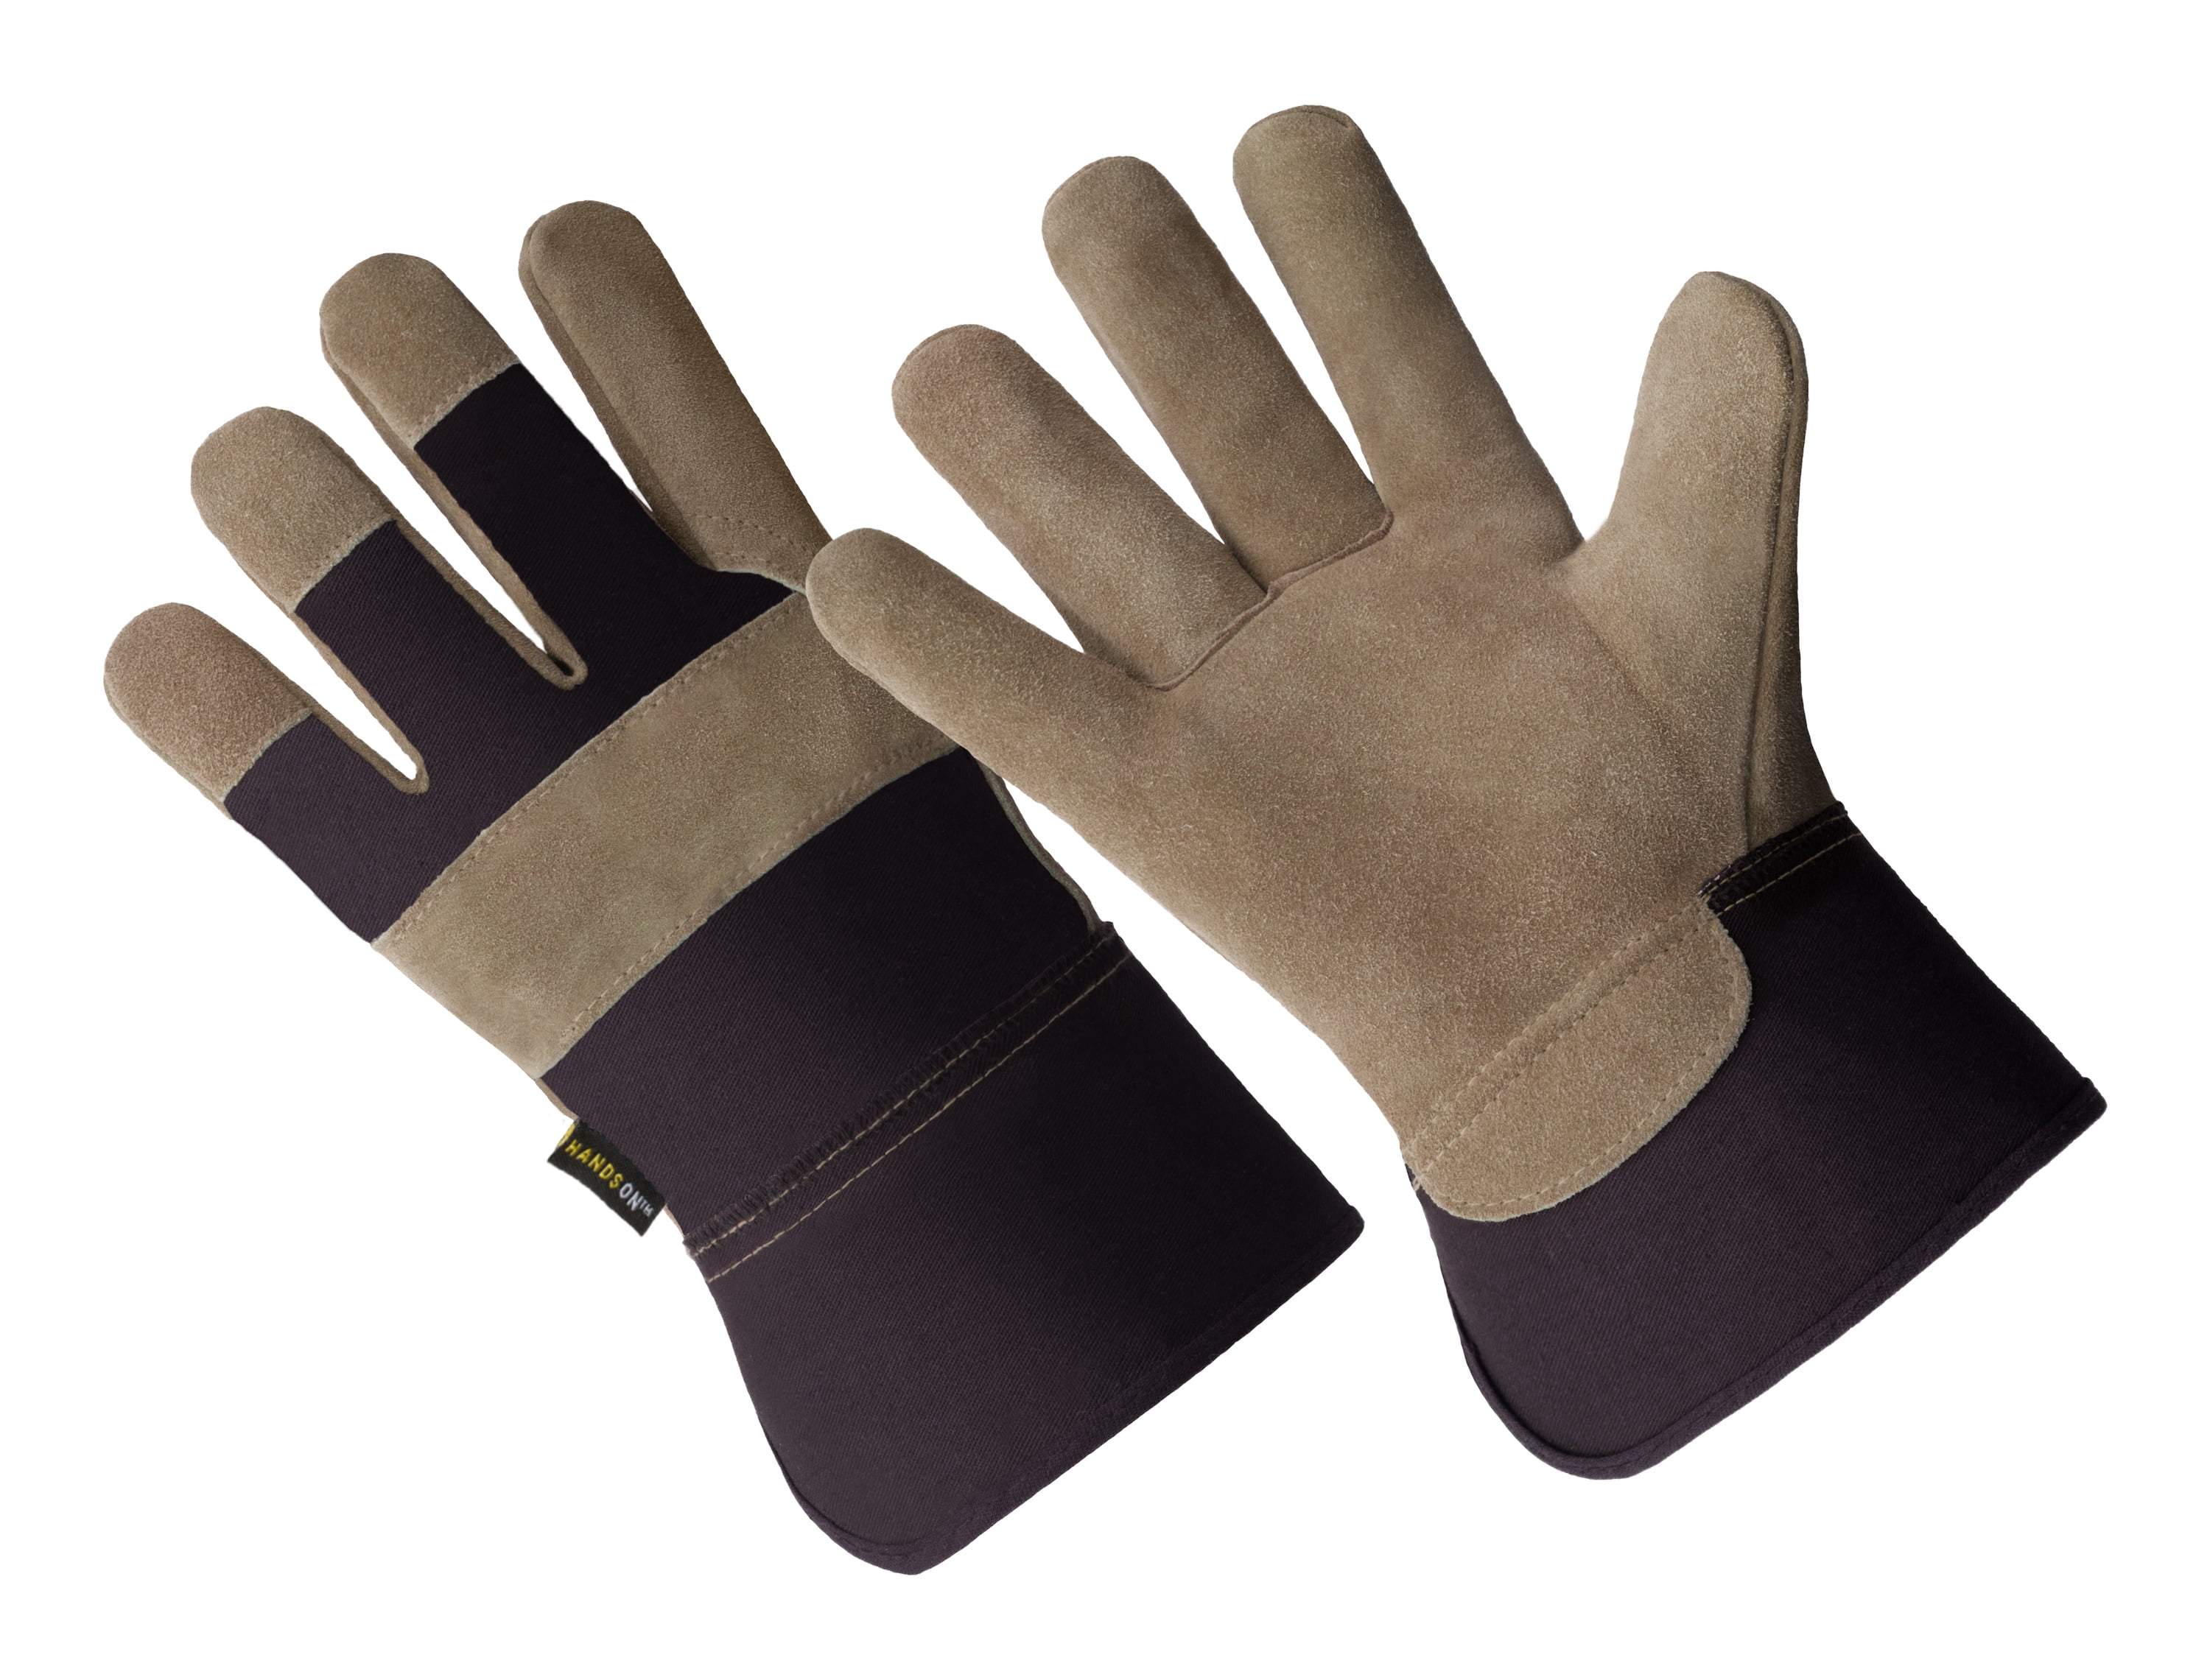 5 Pair Pack. G & F 5025L-5 Premium Suede Leather Work Gloves with Extra Long Rubberized Safety Cuff